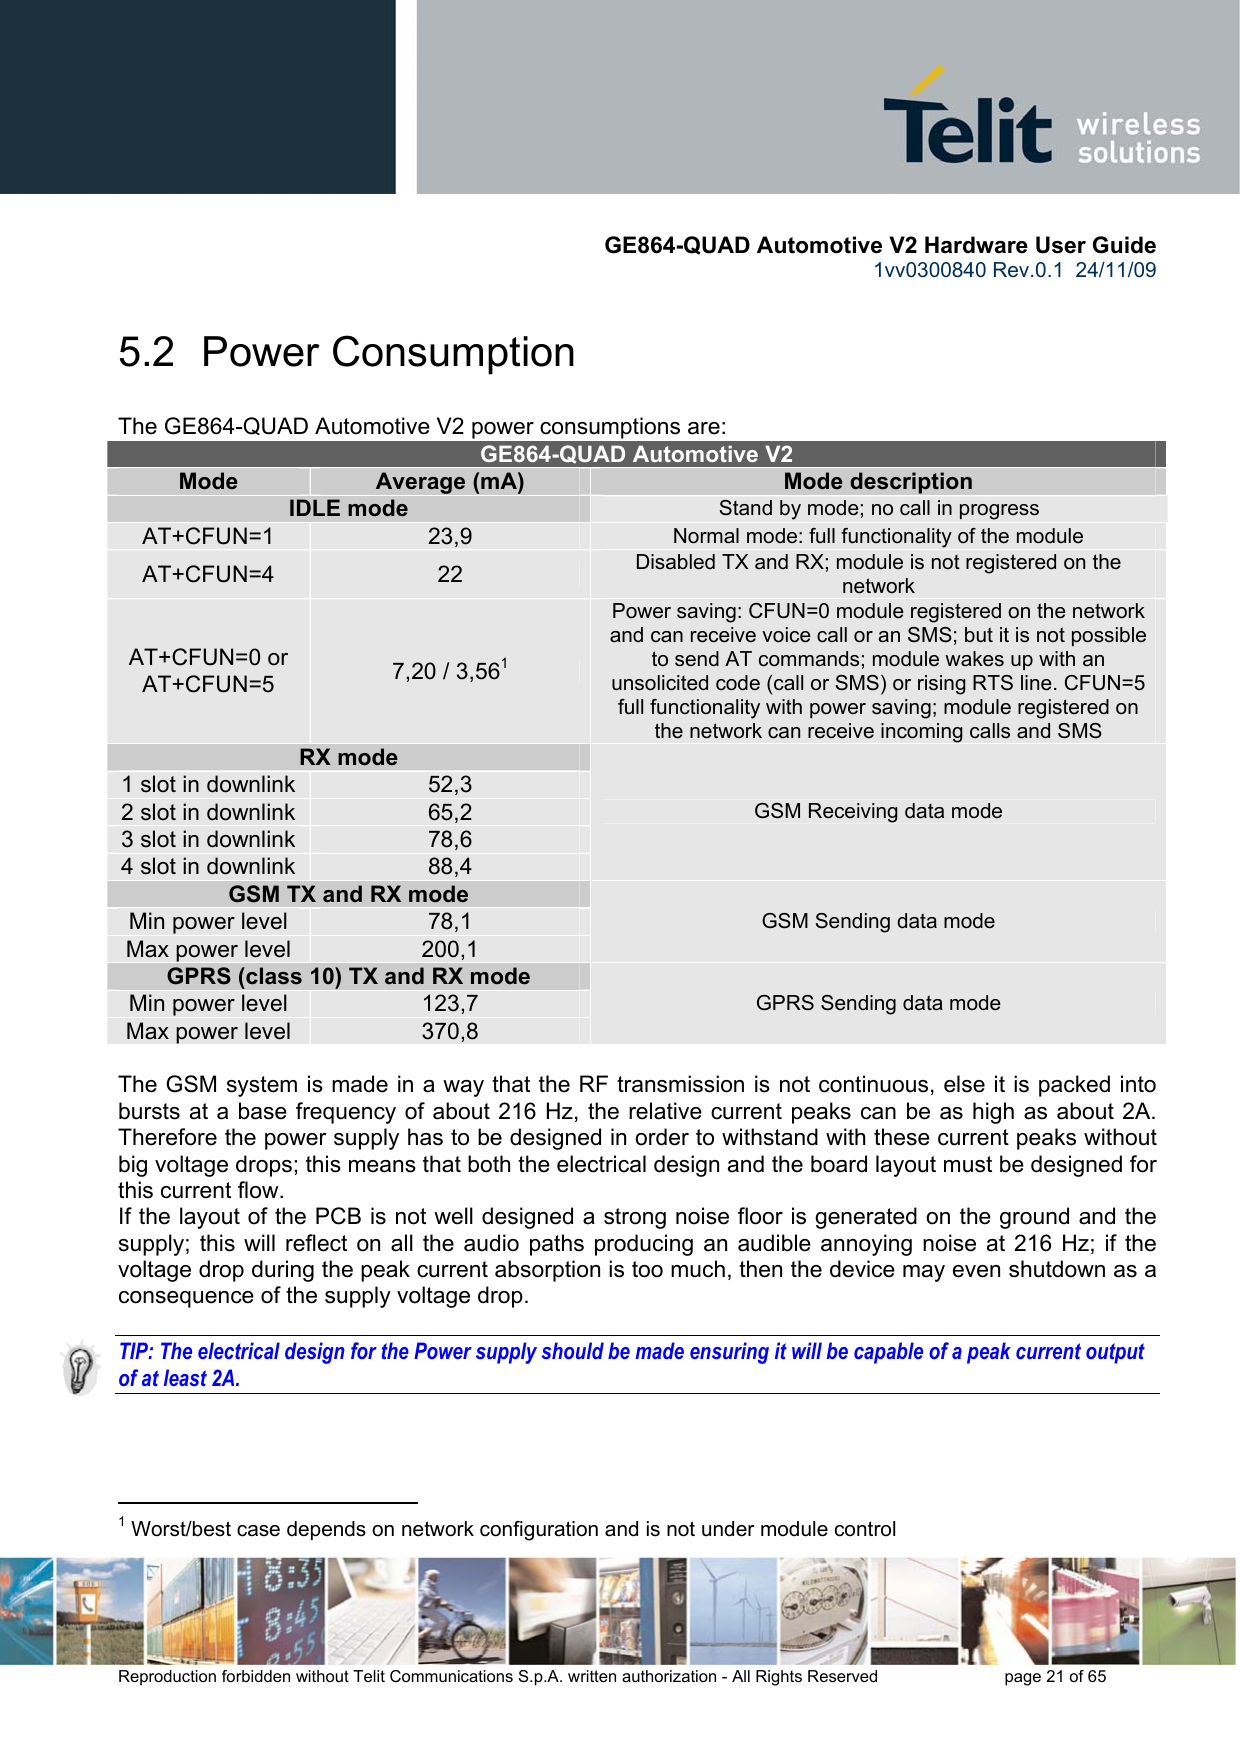       GE864-QUAD Automotive V2 Hardware User Guide 1vv0300840 Rev.0.1  24/11/09      Reproduction forbidden without Telit Communications S.p.A. written authorization - All Rights Reserved    page 21 of 65  5.2  Power Consumption The GE864-QUAD Automotive V2 power consumptions are:  GE864-QUAD Automotive V2 Mode   Average (mA)  Mode description IDLE mode  Stand by mode; no call in progress AT+CFUN=1  23,9  Normal mode: full functionality of the module AT+CFUN=4  22  Disabled TX and RX; module is not registered on the network AT+CFUN=0 or AT+CFUN=5  7,20 / 3,561 Power saving: CFUN=0 module registered on the network and can receive voice call or an SMS; but it is not possible to send AT commands; module wakes up with an unsolicited code (call or SMS) or rising RTS line. CFUN=5 full functionality with power saving; module registered on the network can receive incoming calls and SMS  RX mode 1 slot in downlink  52,3 2 slot in downlink  65,2 3 slot in downlink  78,6 4 slot in downlink  88,4 GSM Receiving data mode GSM TX and RX mode  Min power level  78,1 Max power level  200,1 GSM Sending data mode GPRS (class 10) TX and RX mode  Min power level  123,7 Max power level  370,8 GPRS Sending data mode  The GSM system is made in a way that the RF transmission is not continuous, else it is packed into bursts at a base frequency of about 216 Hz, the relative current peaks can be as high as about 2A. Therefore the power supply has to be designed in order to withstand with these current peaks without big voltage drops; this means that both the electrical design and the board layout must be designed for this current flow. If the layout of the PCB is not well designed a strong noise floor is generated on the ground and the supply; this will reflect on all the audio paths producing an audible annoying noise at 216 Hz; if the voltage drop during the peak current absorption is too much, then the device may even shutdown as a consequence of the supply voltage drop.  TIP: The electrical design for the Power supply should be made ensuring it will be capable of a peak current output of at least 2A.                                                  1 Worst/best case depends on network configuration and is not under module control  